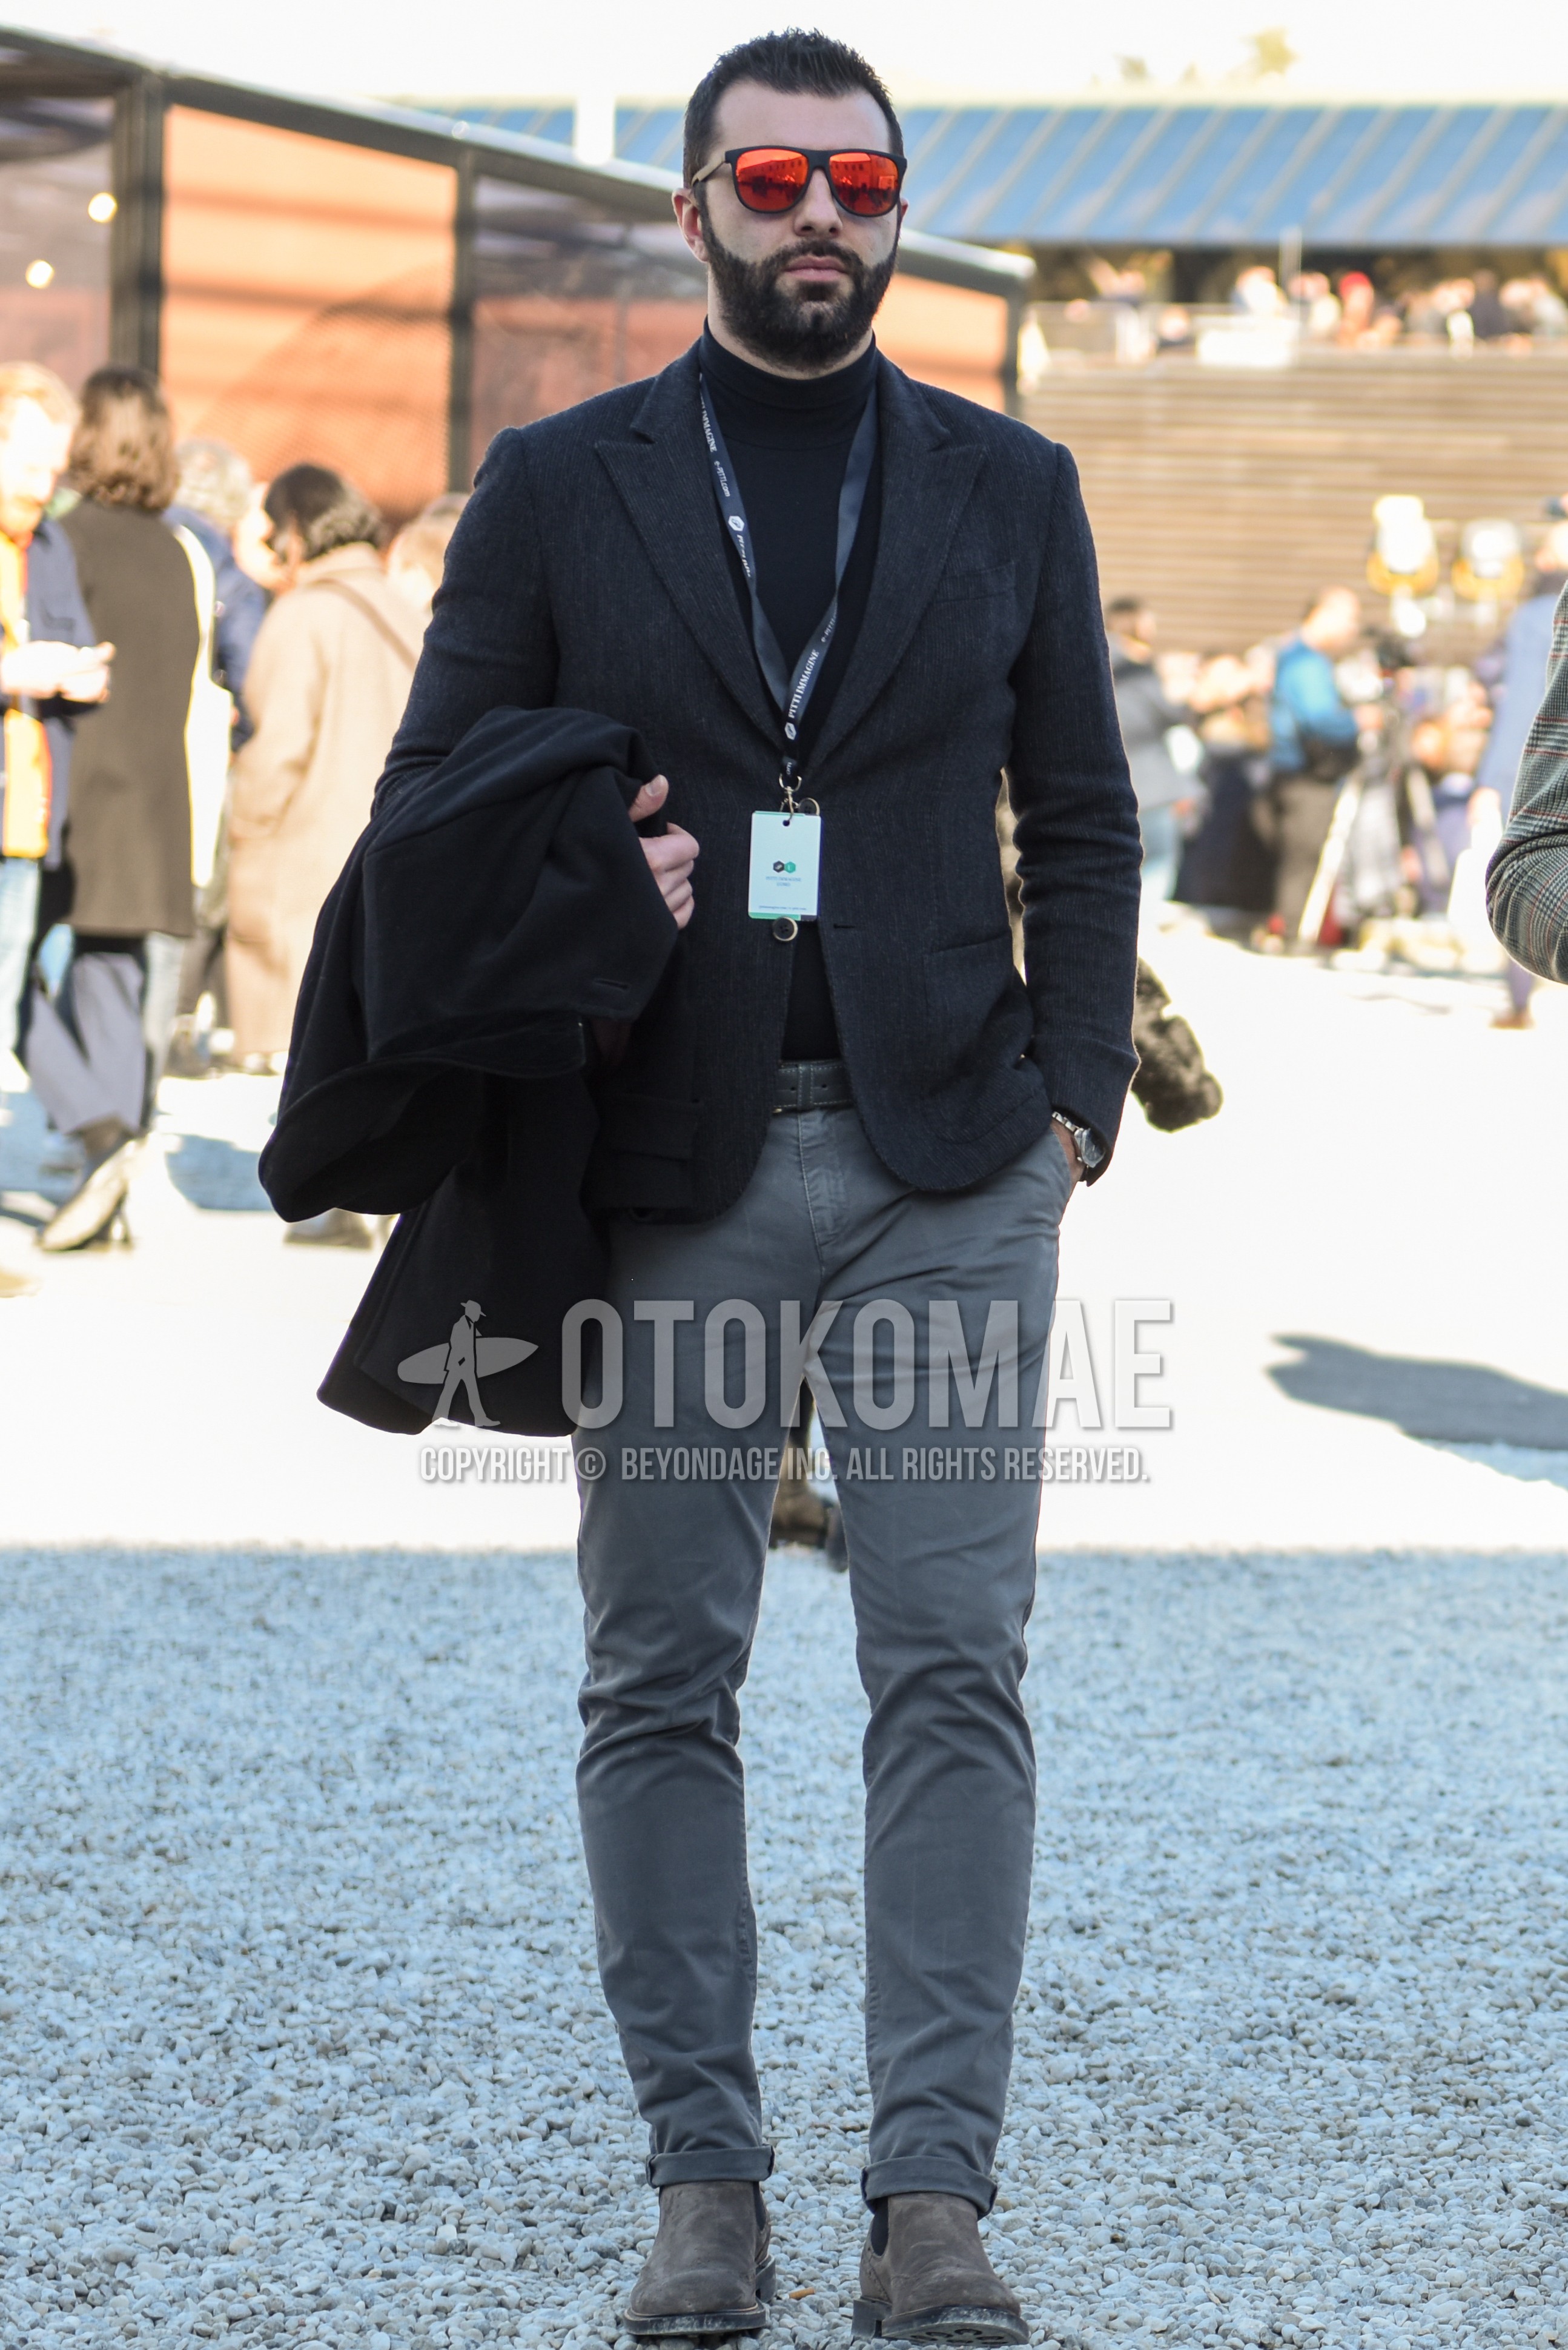 Men's spring autumn outfit with black plain sunglasses, dark gray plain tailored jacket, black plain turtleneck knit, dark gray plain leather belt, gray plain chinos, beige side-gore boots.